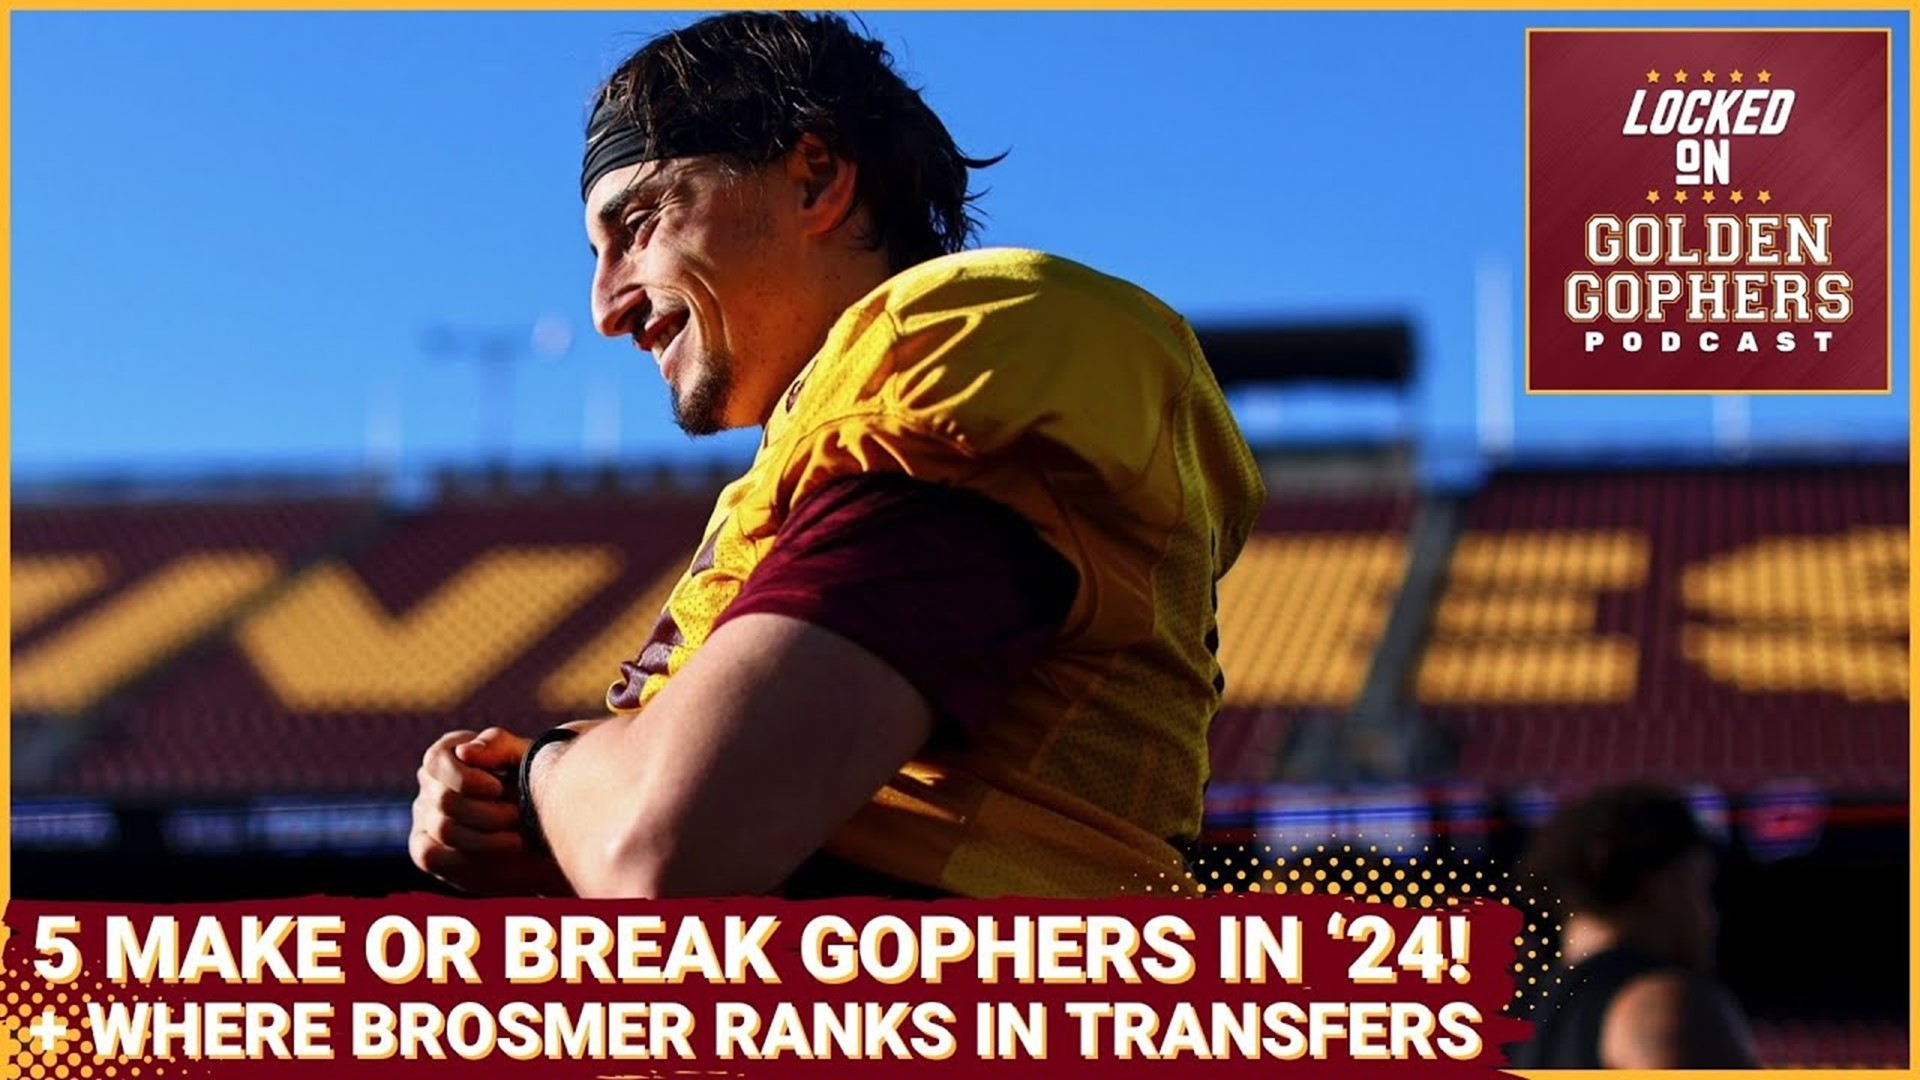 On today's Locked On Golden Gophers, host Kane Rob,  discusses how the Minnesota Gophers 2024 season is critical and who I see as the maker or break players